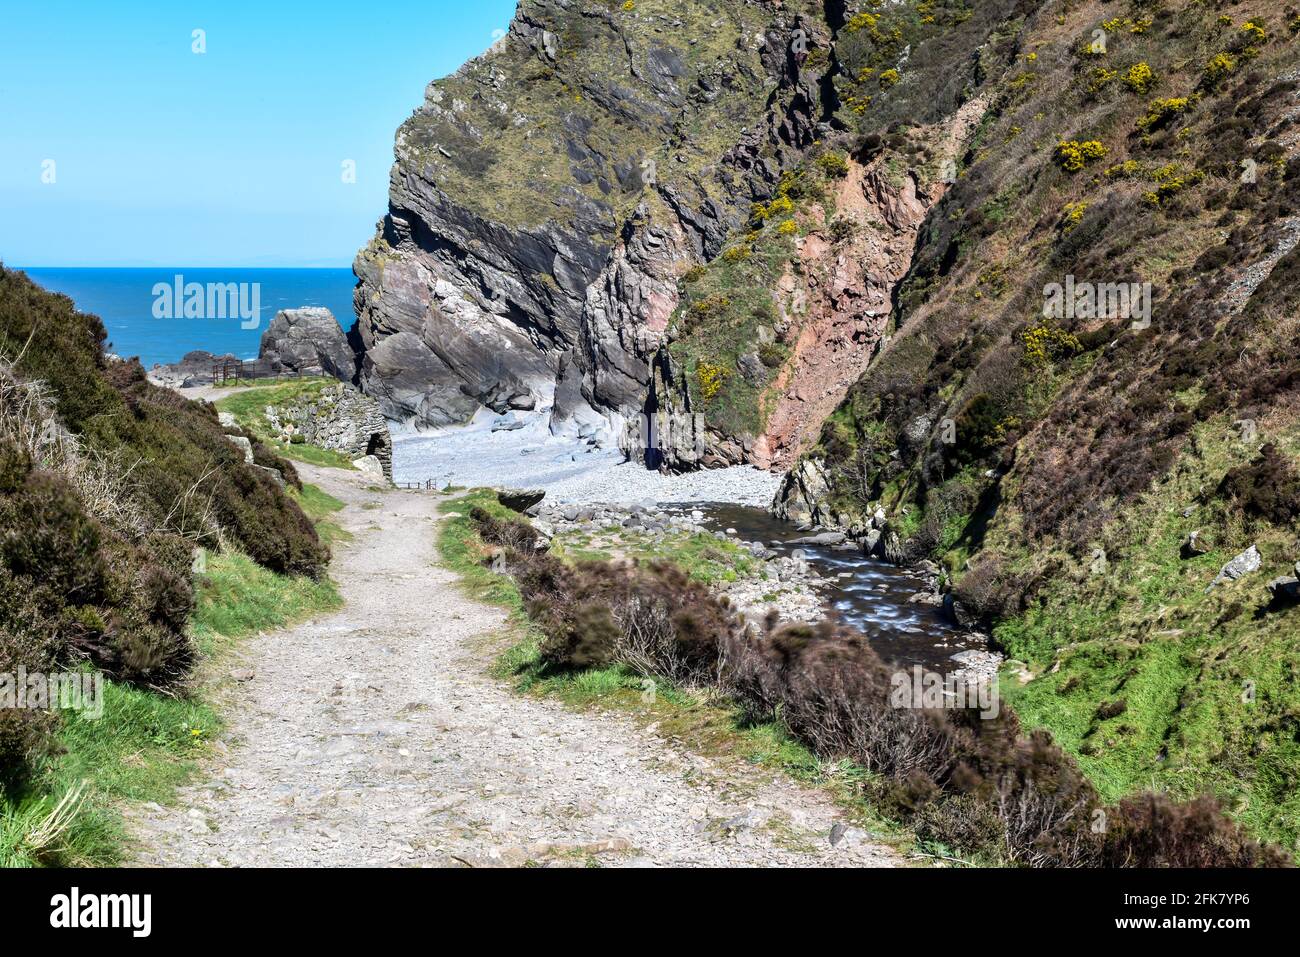 Footpath through country hiking route on a coastal walk uk Stock Photo